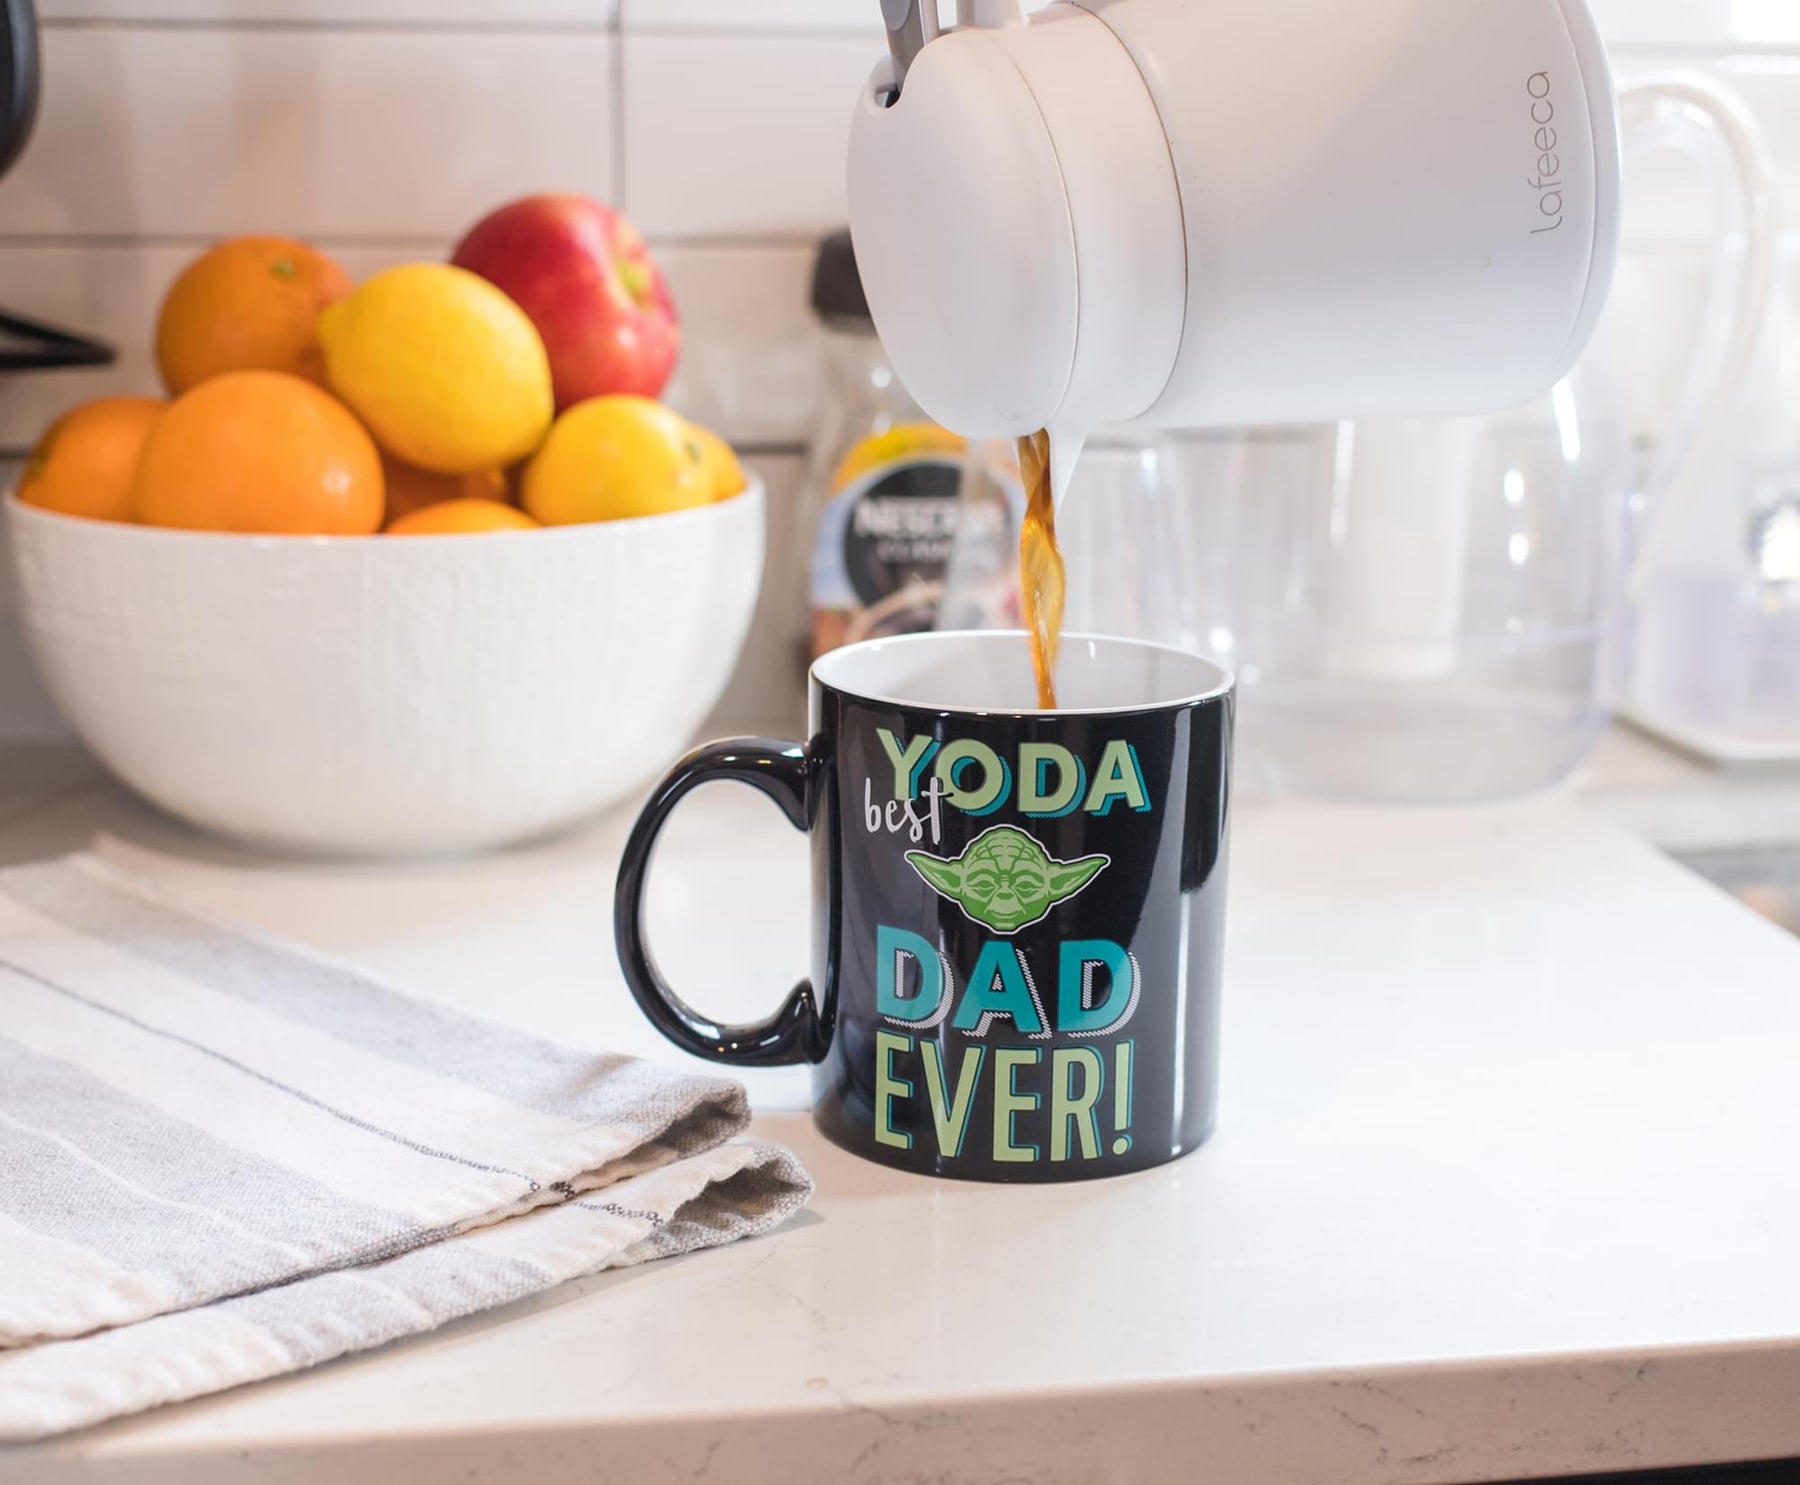 Star Wars "Yoda Best Dad Ever" Ceramic Mug | Holds 20 Ounces | Toynk Exclusive